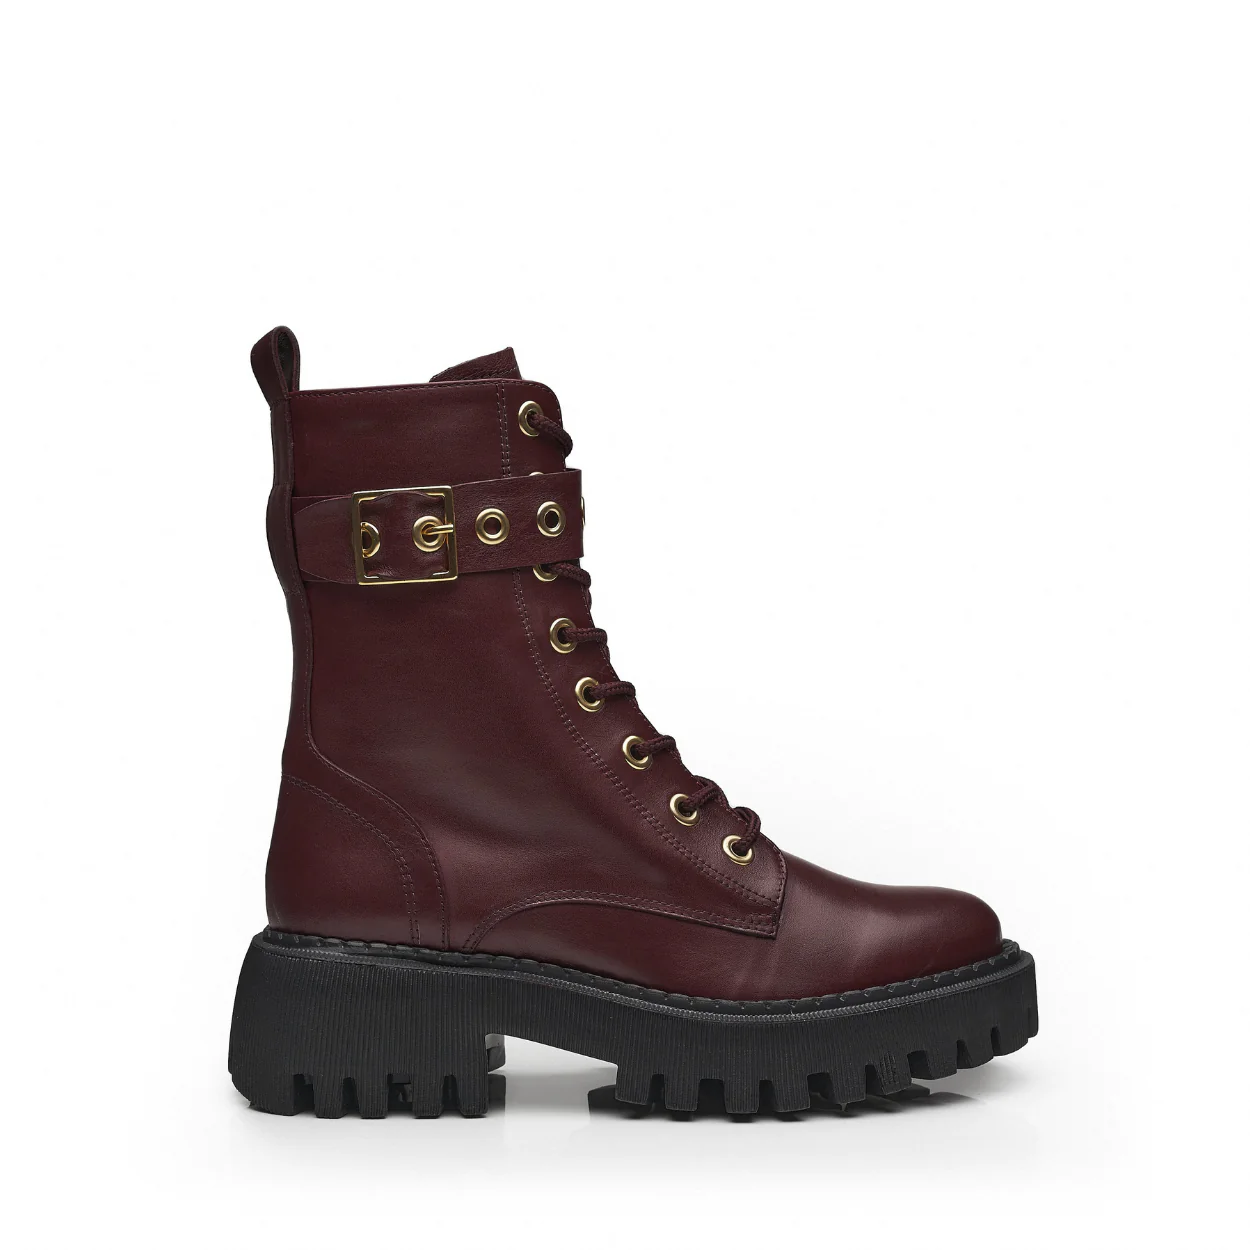 Military Style Boots with Buckle